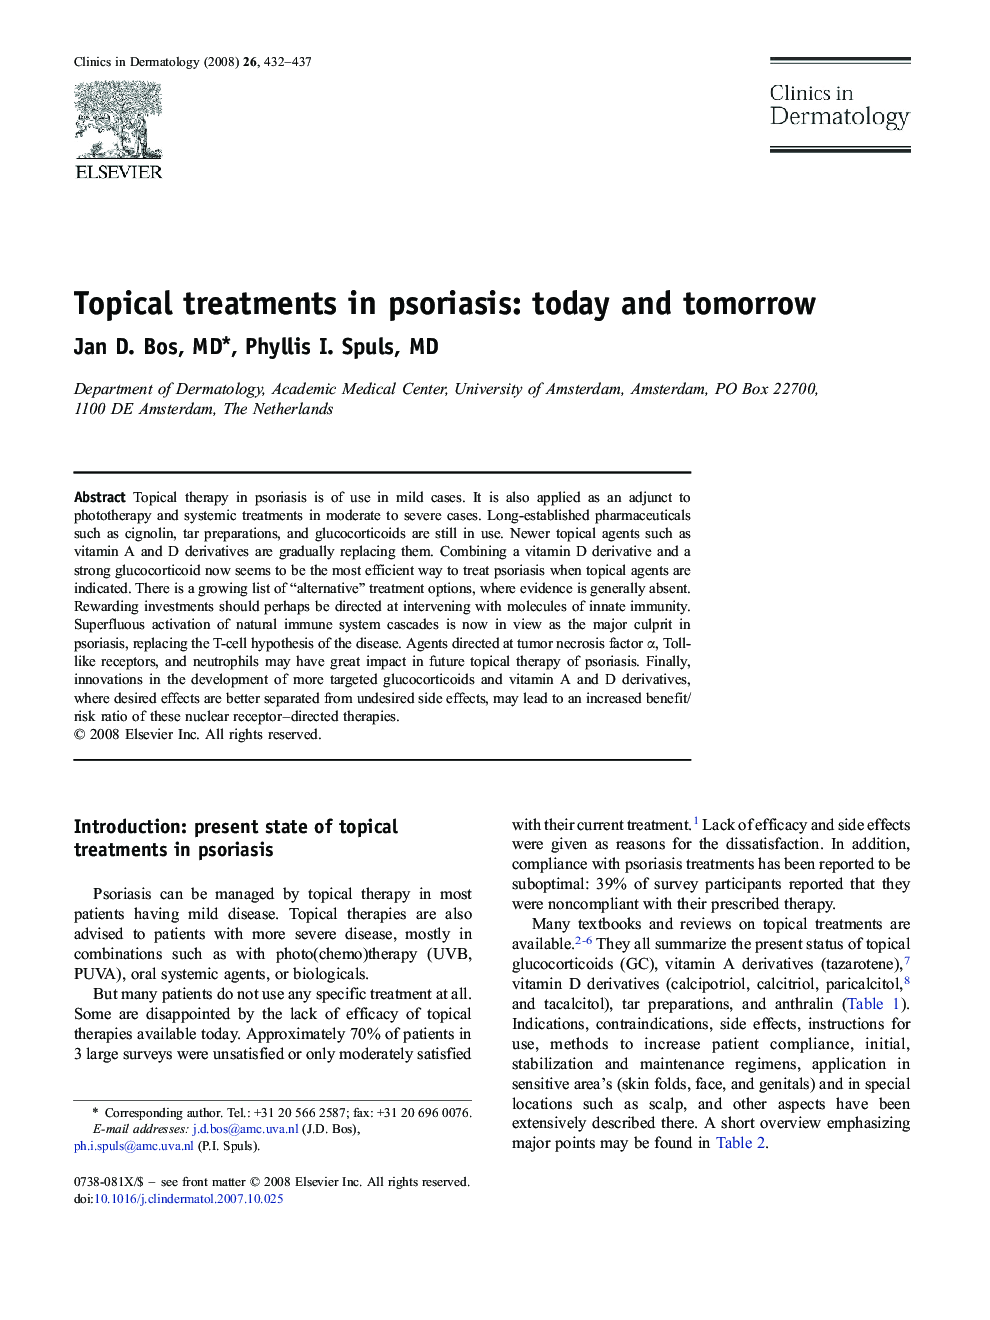 Topical treatments in psoriasis: today and tomorrow